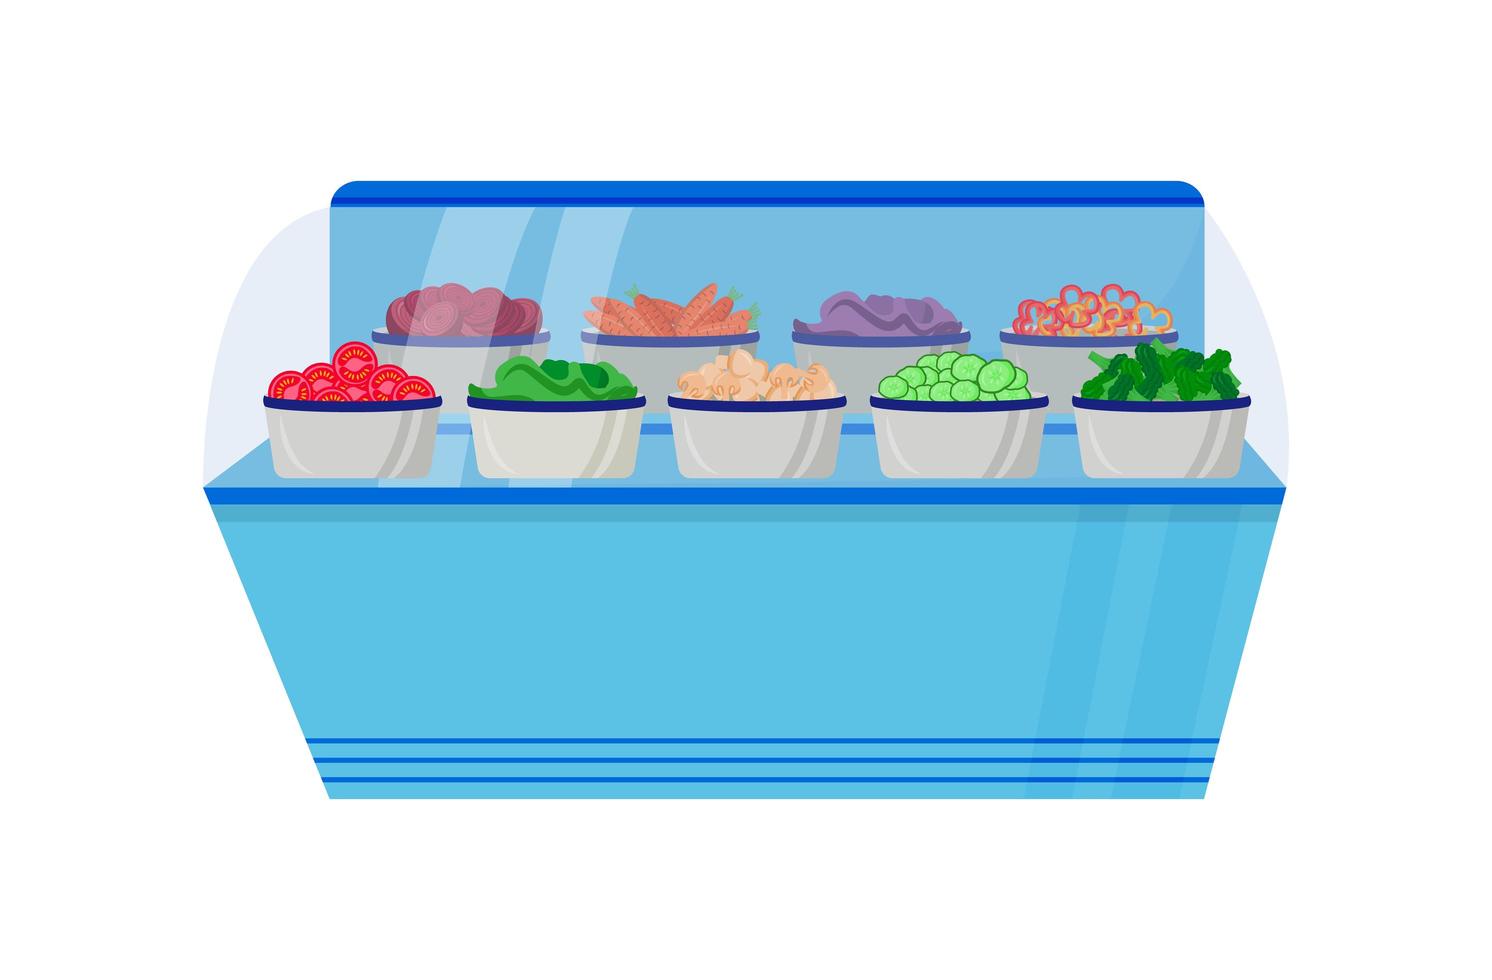 Vegetable counter vector object